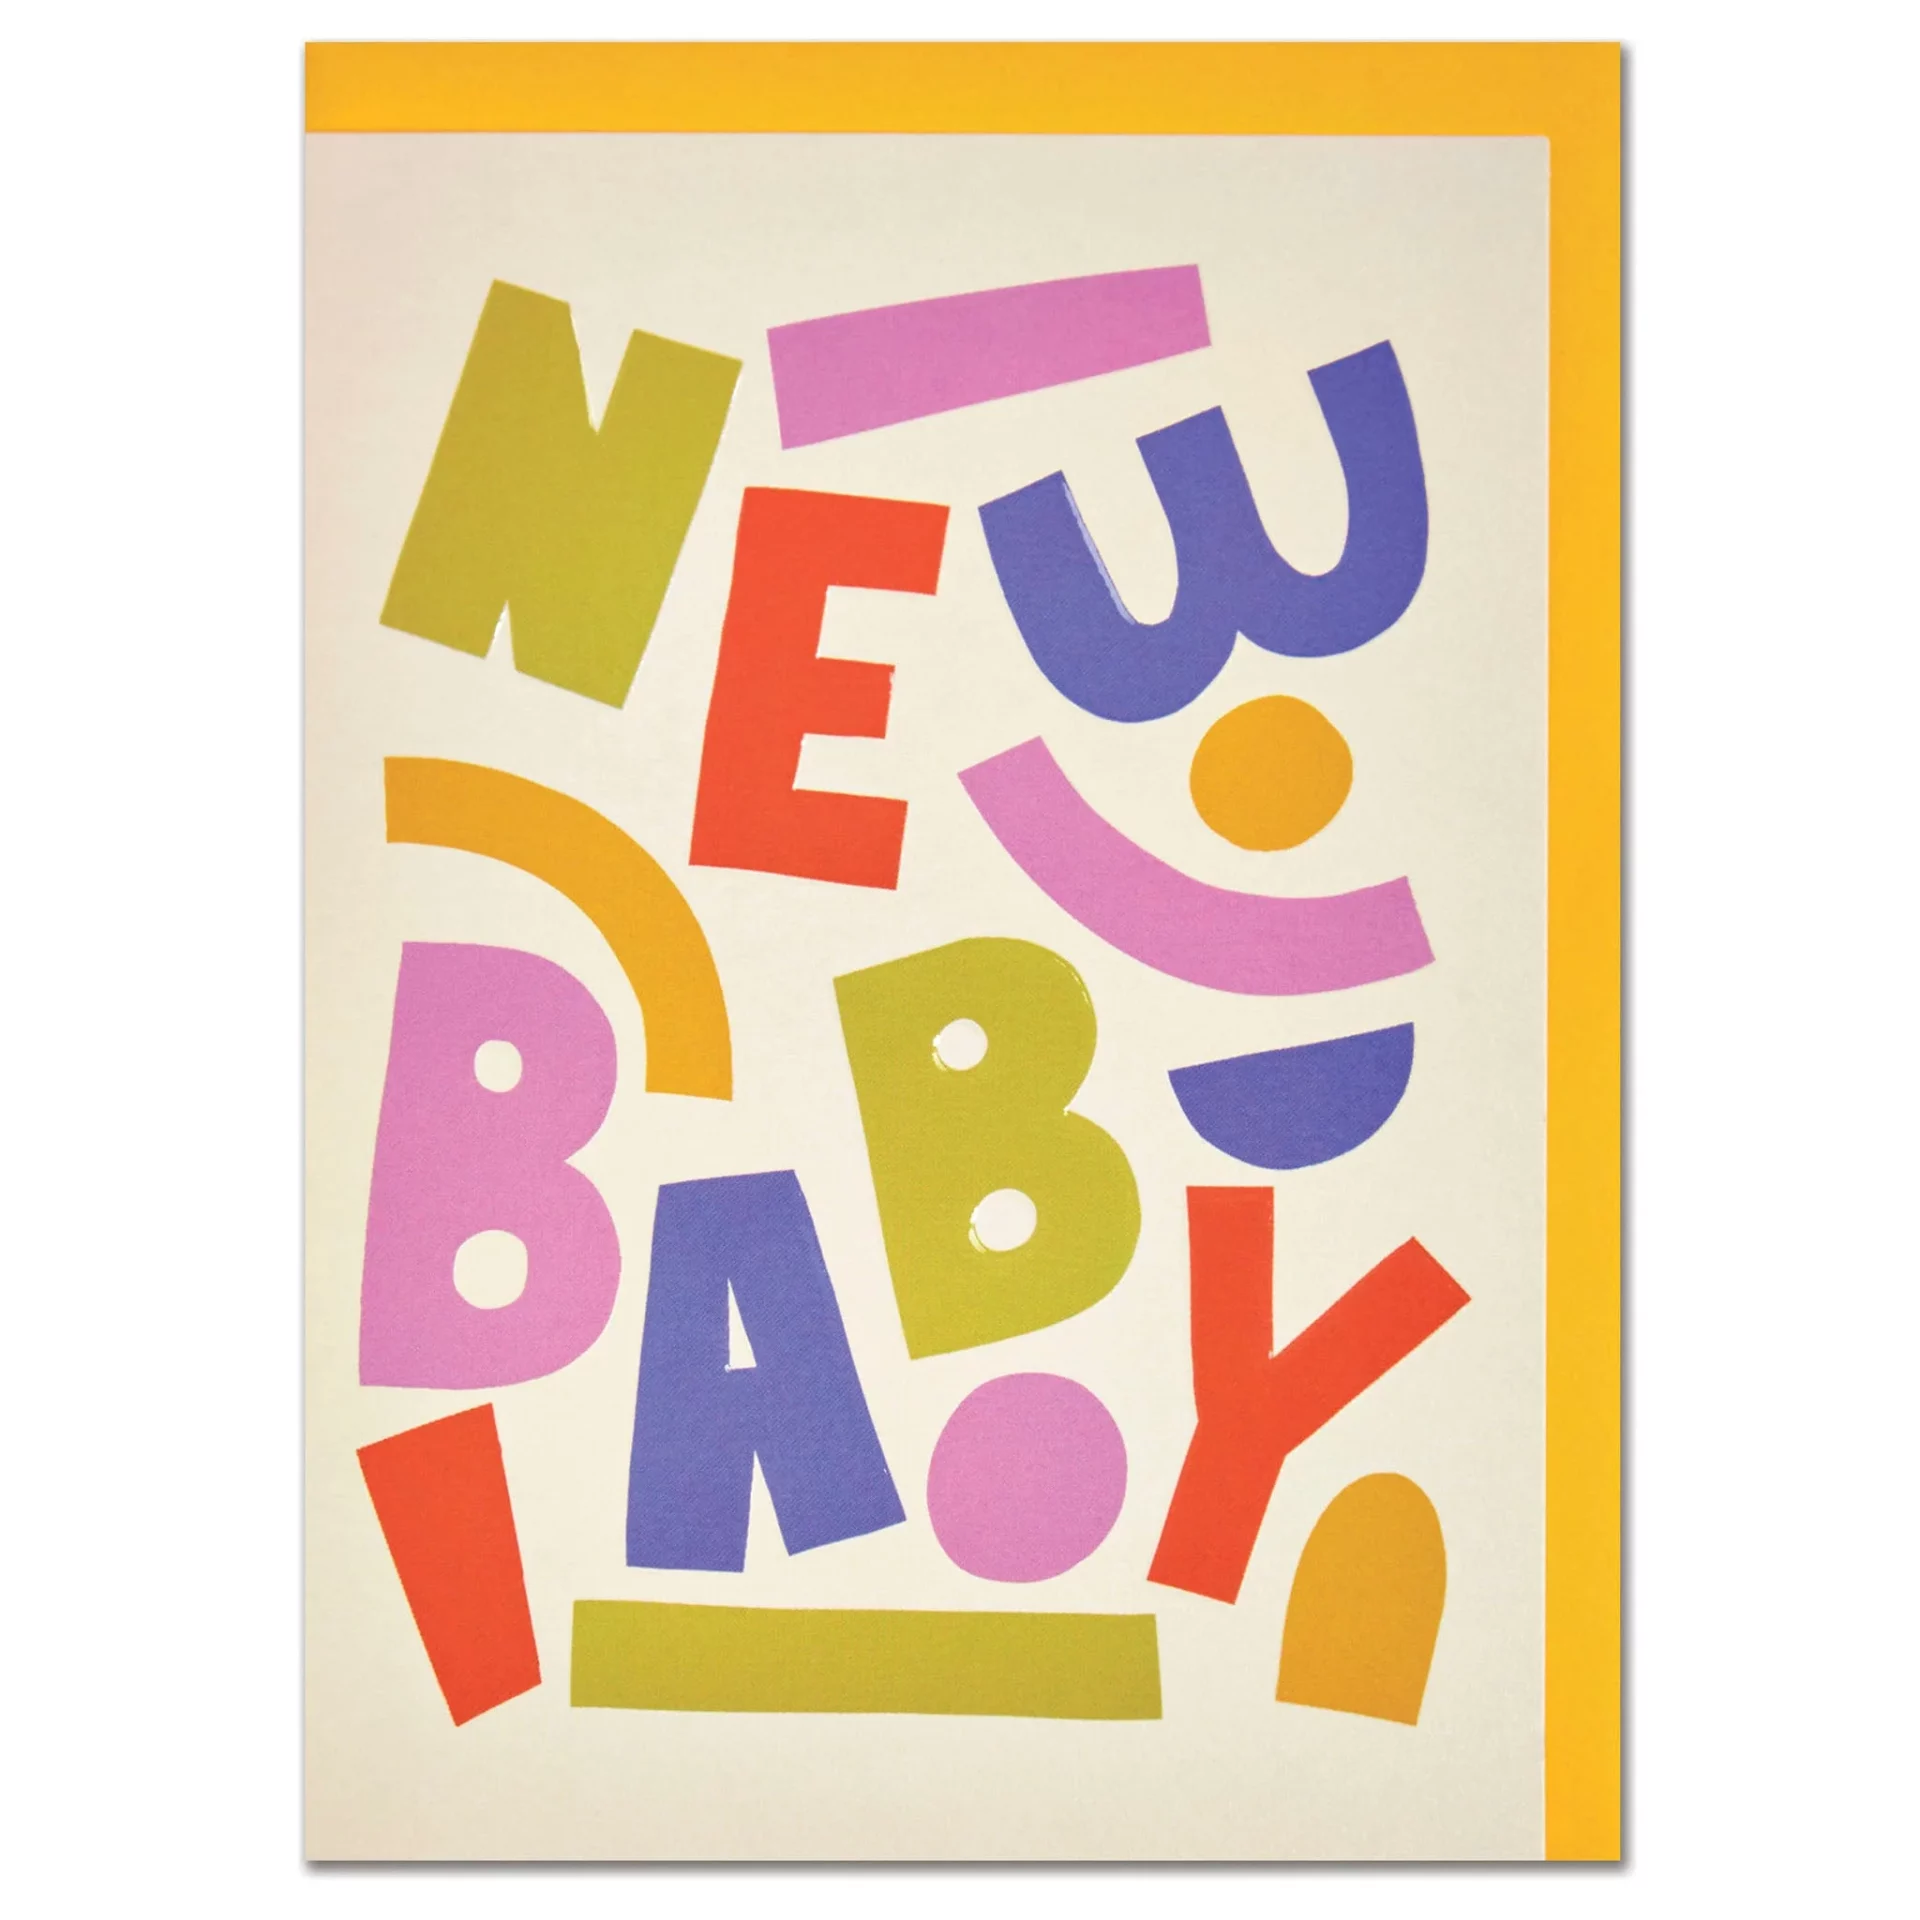 new baby card bold and colourful by raspberry blossom